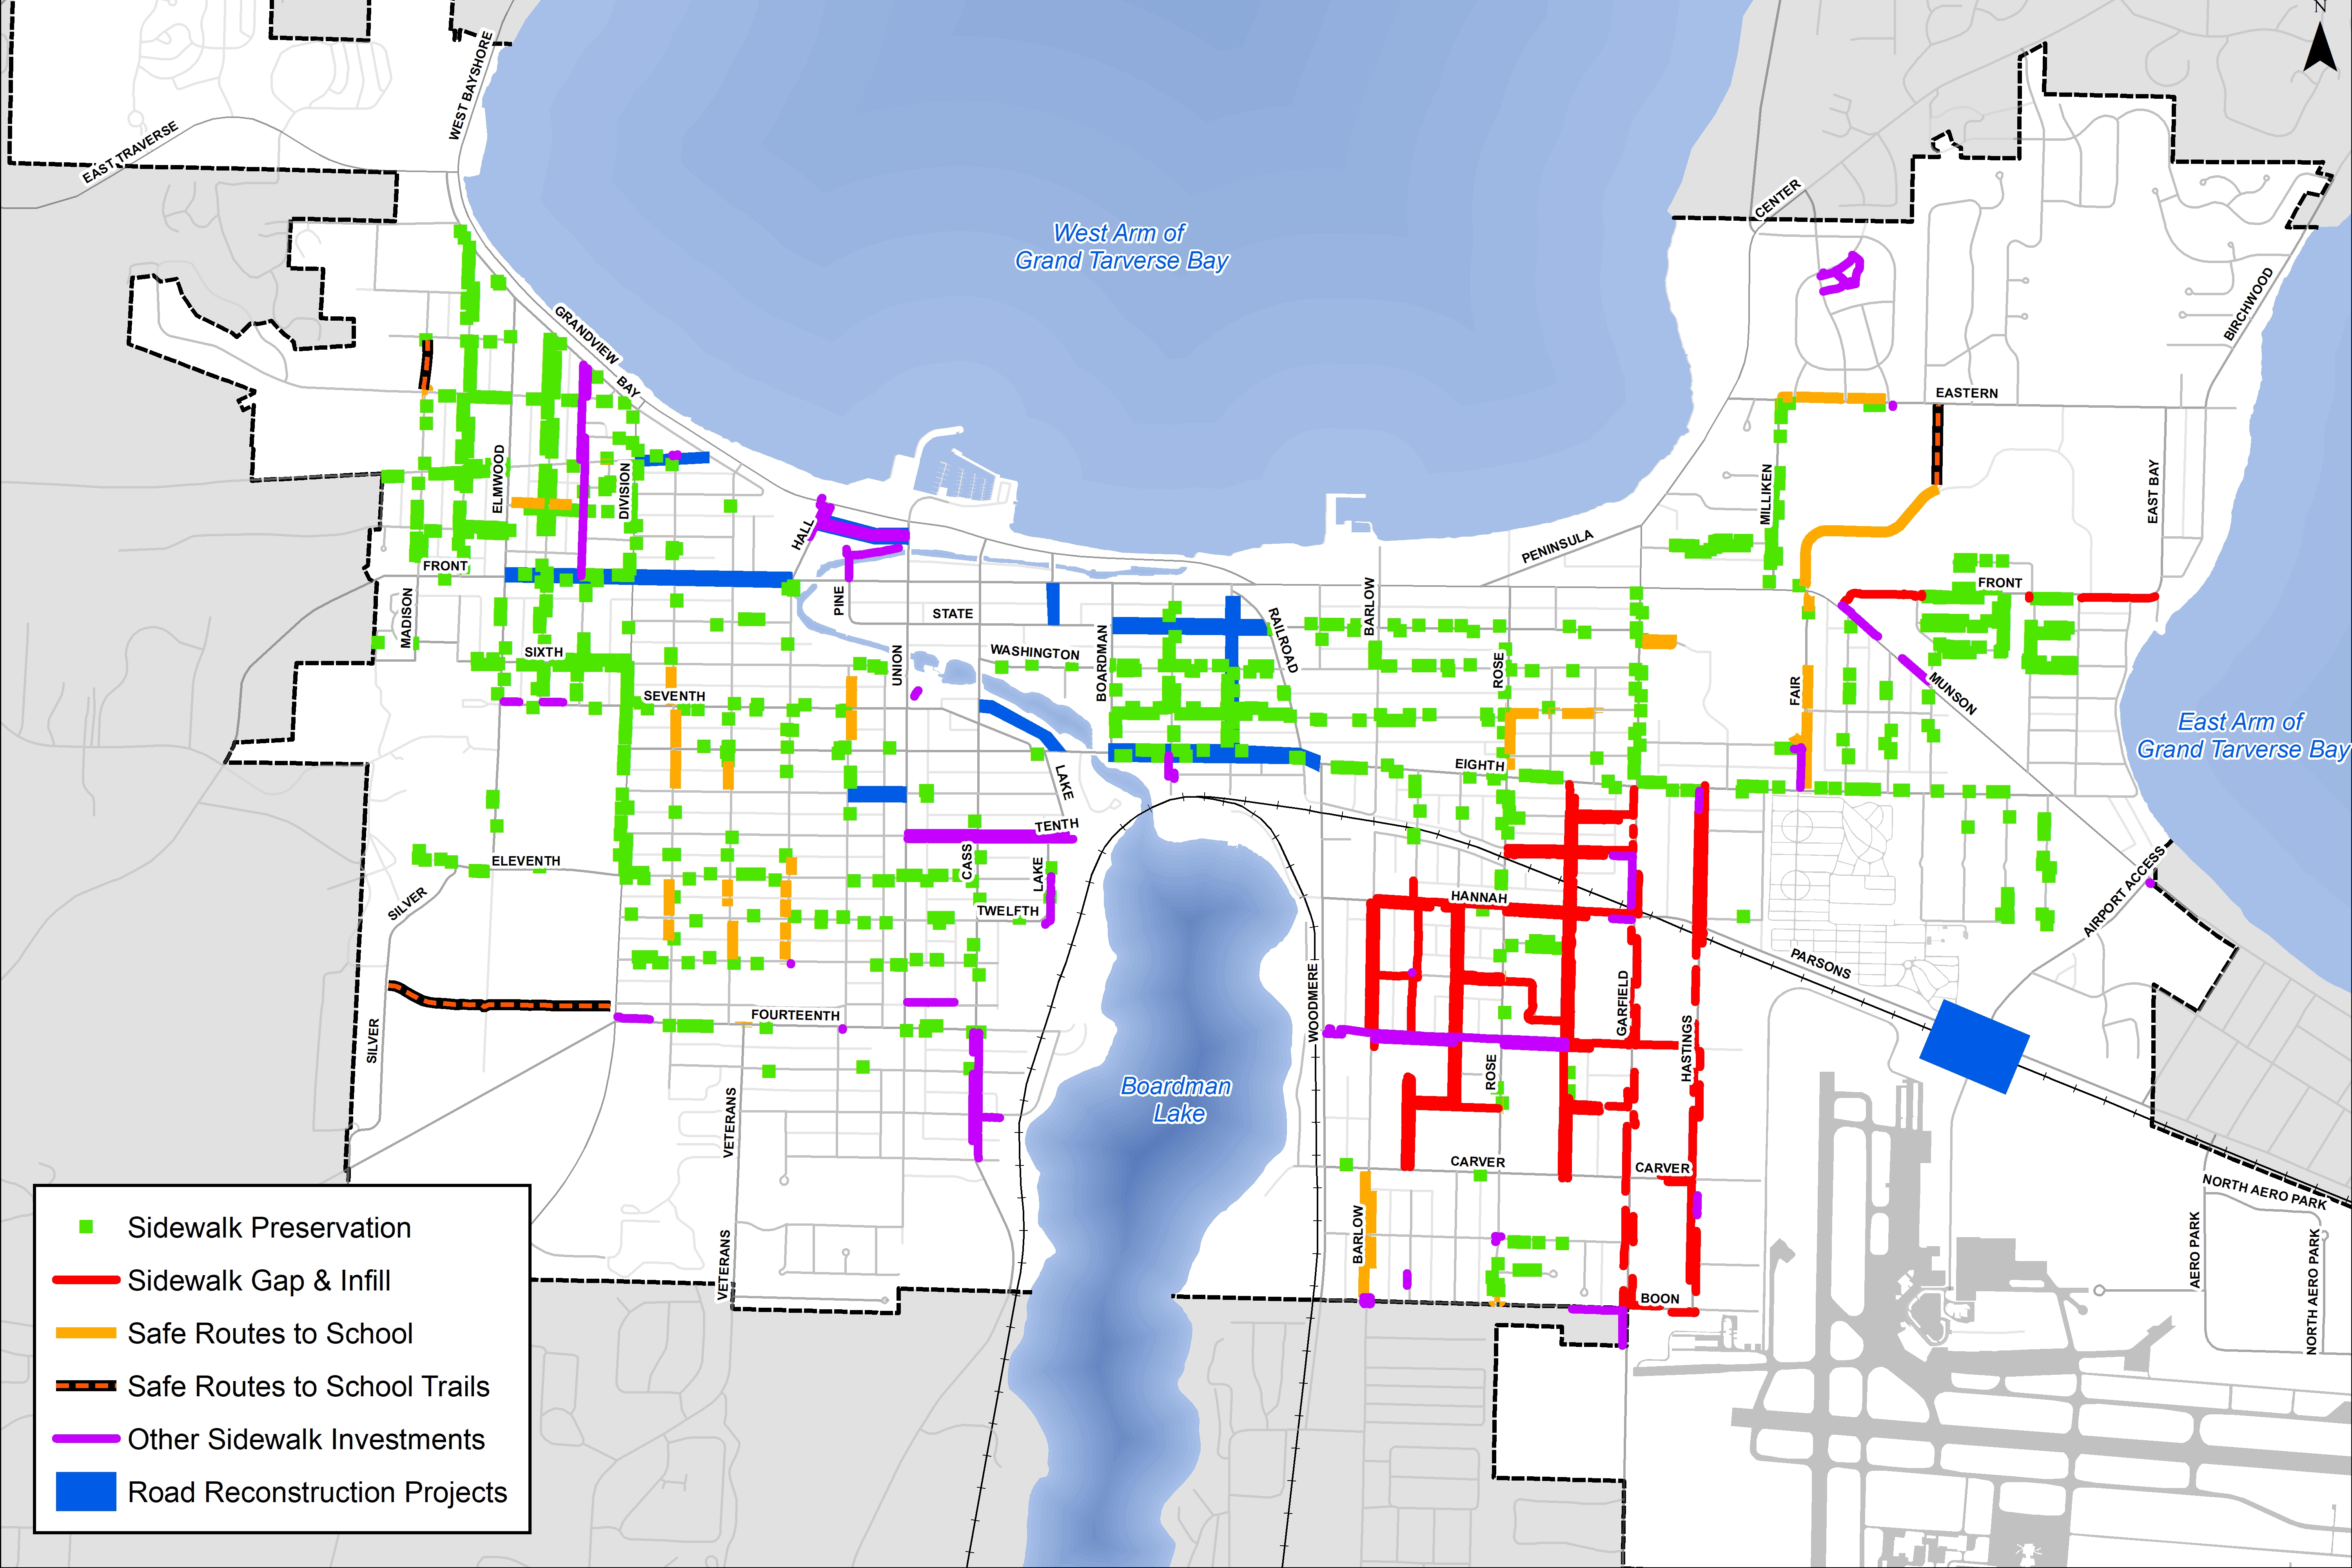 Map of sidewalk improvements from 2016 to 2022